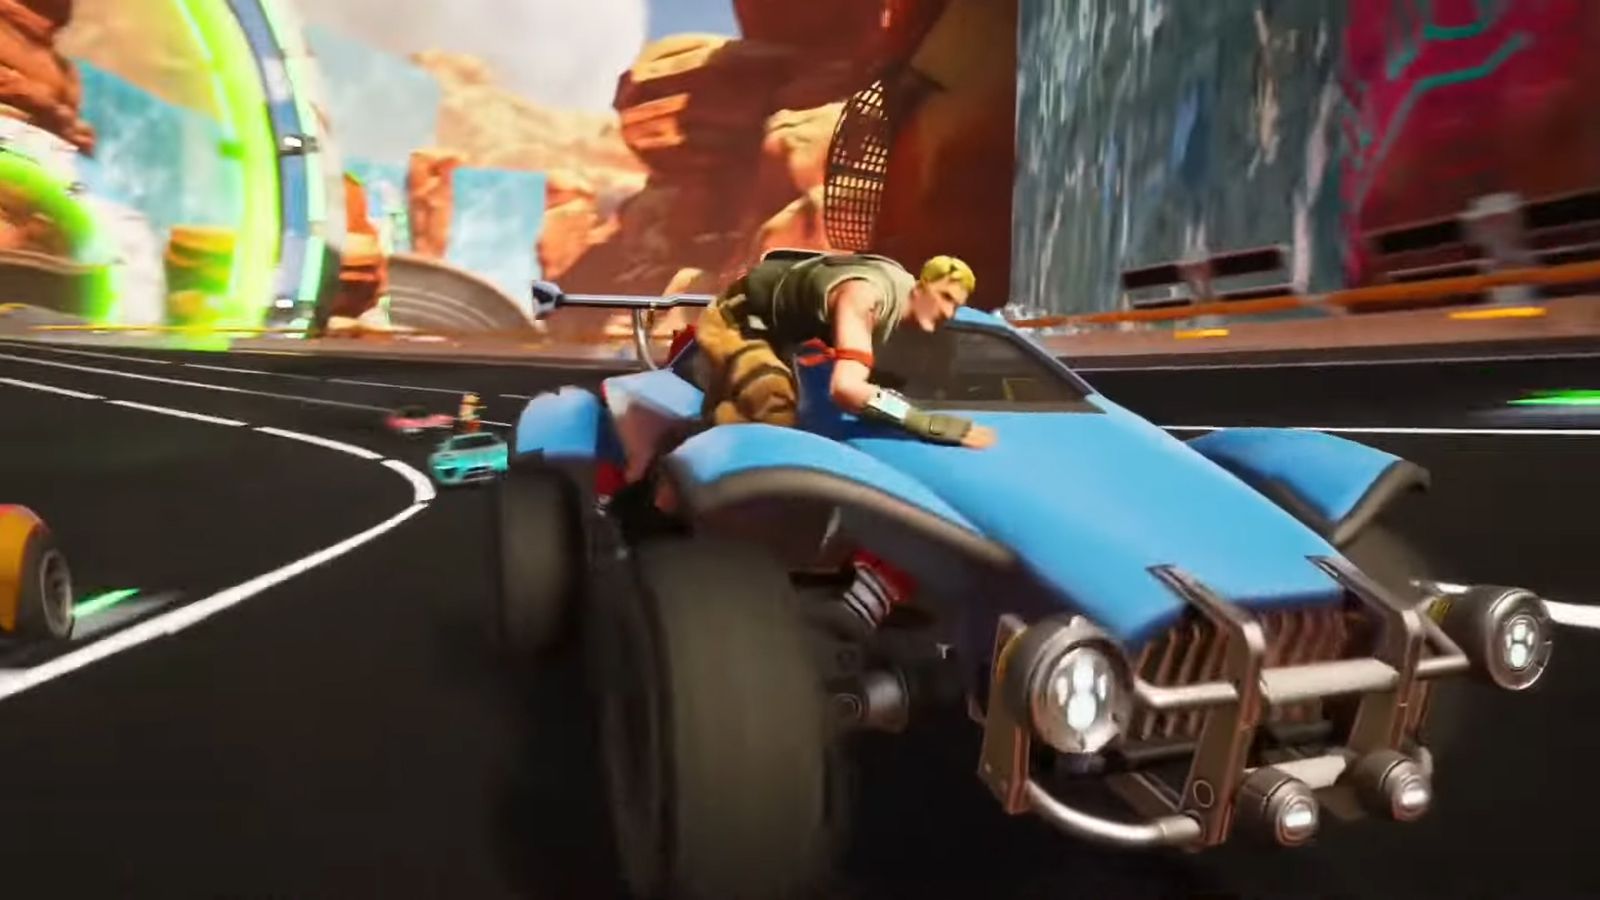 How to transfer cars from Rocket League to Rocket Racing